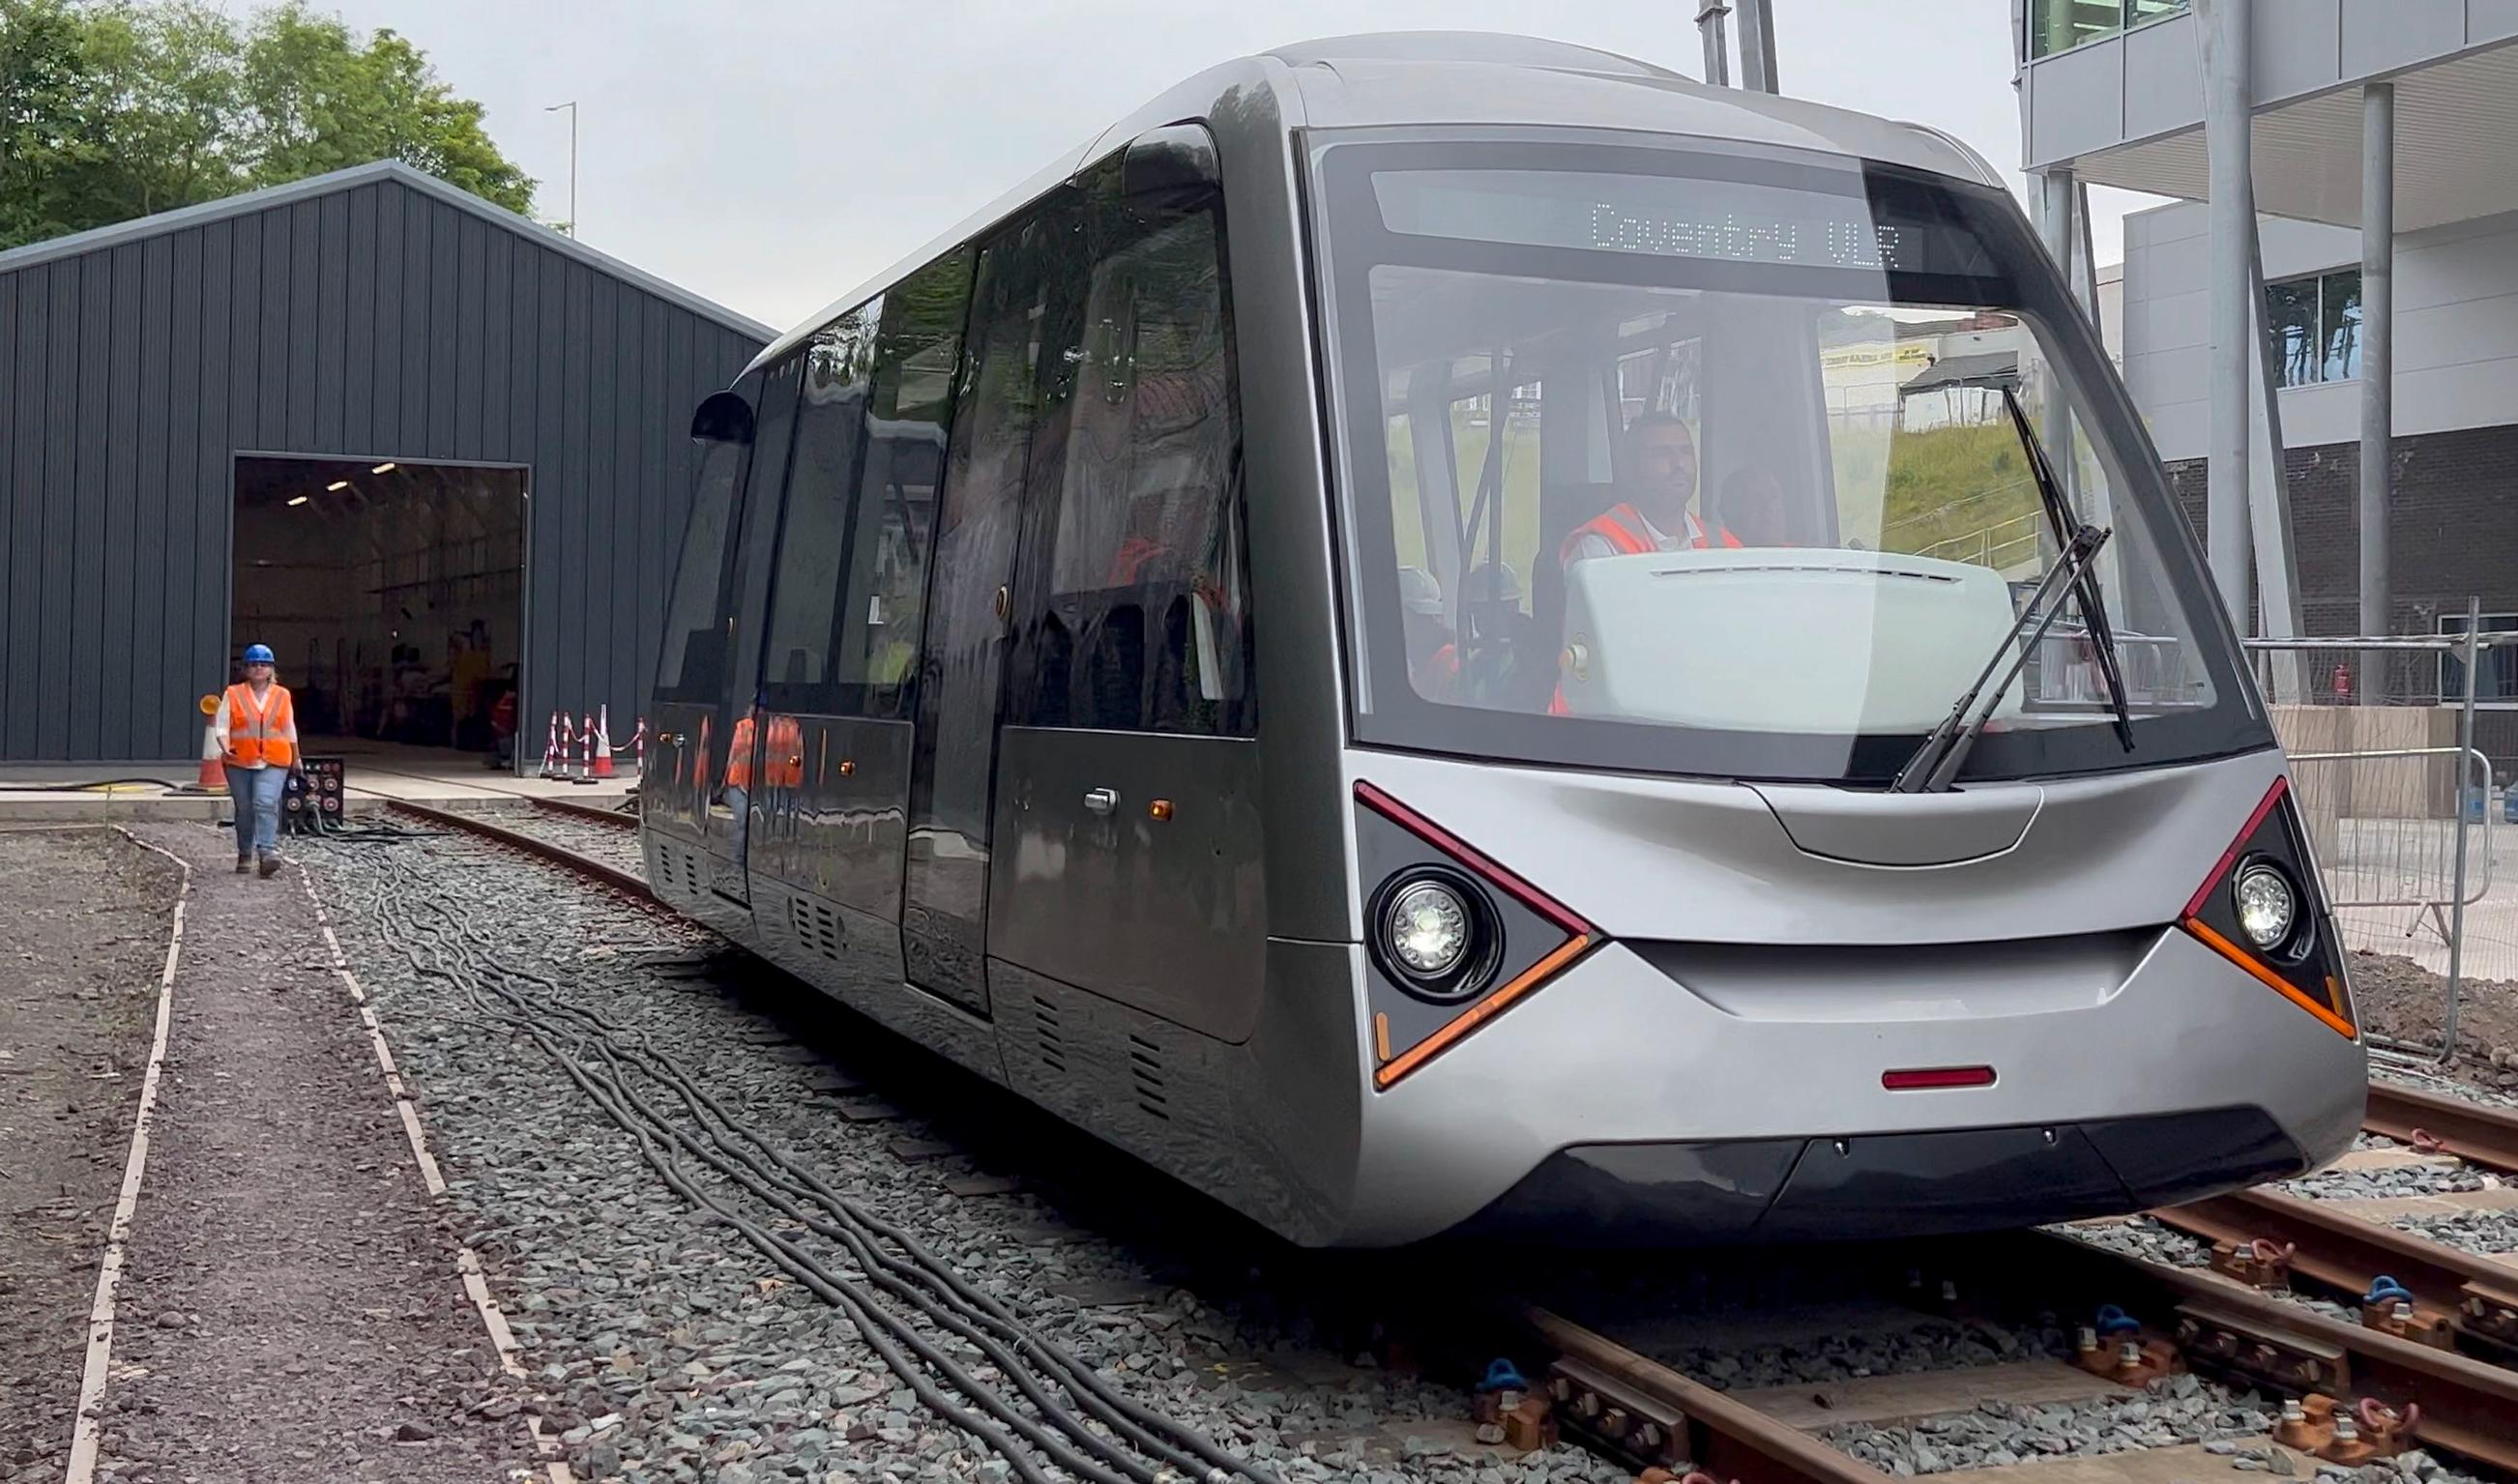 £54m CRSTS funding boost will allow Coventry City Council to press ahead with plans for a very light rail system